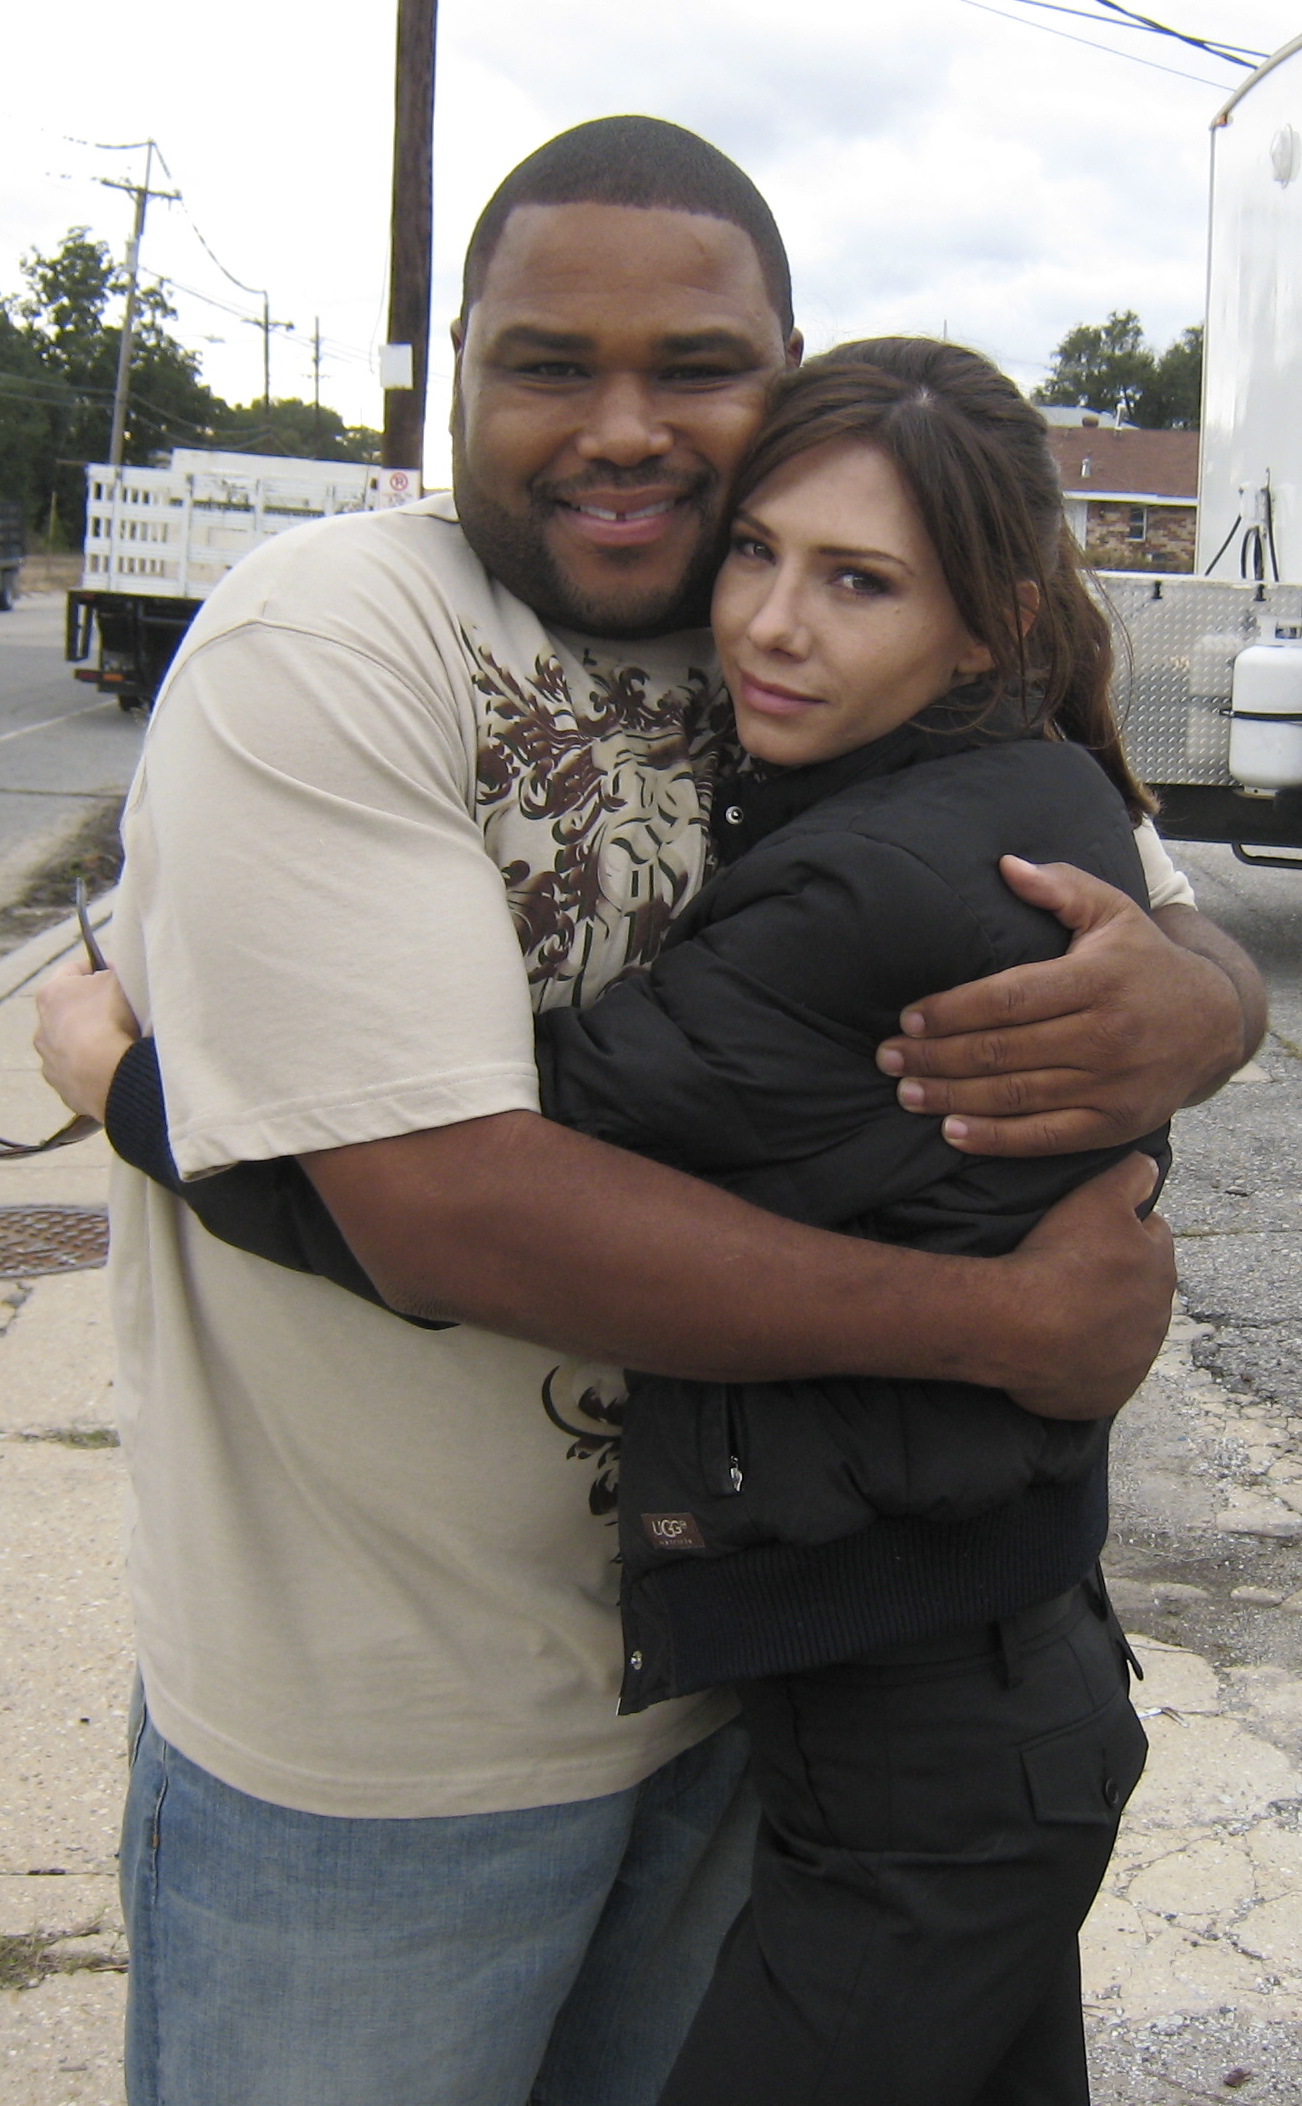 K-Ville with Anthony Anderson, 2005